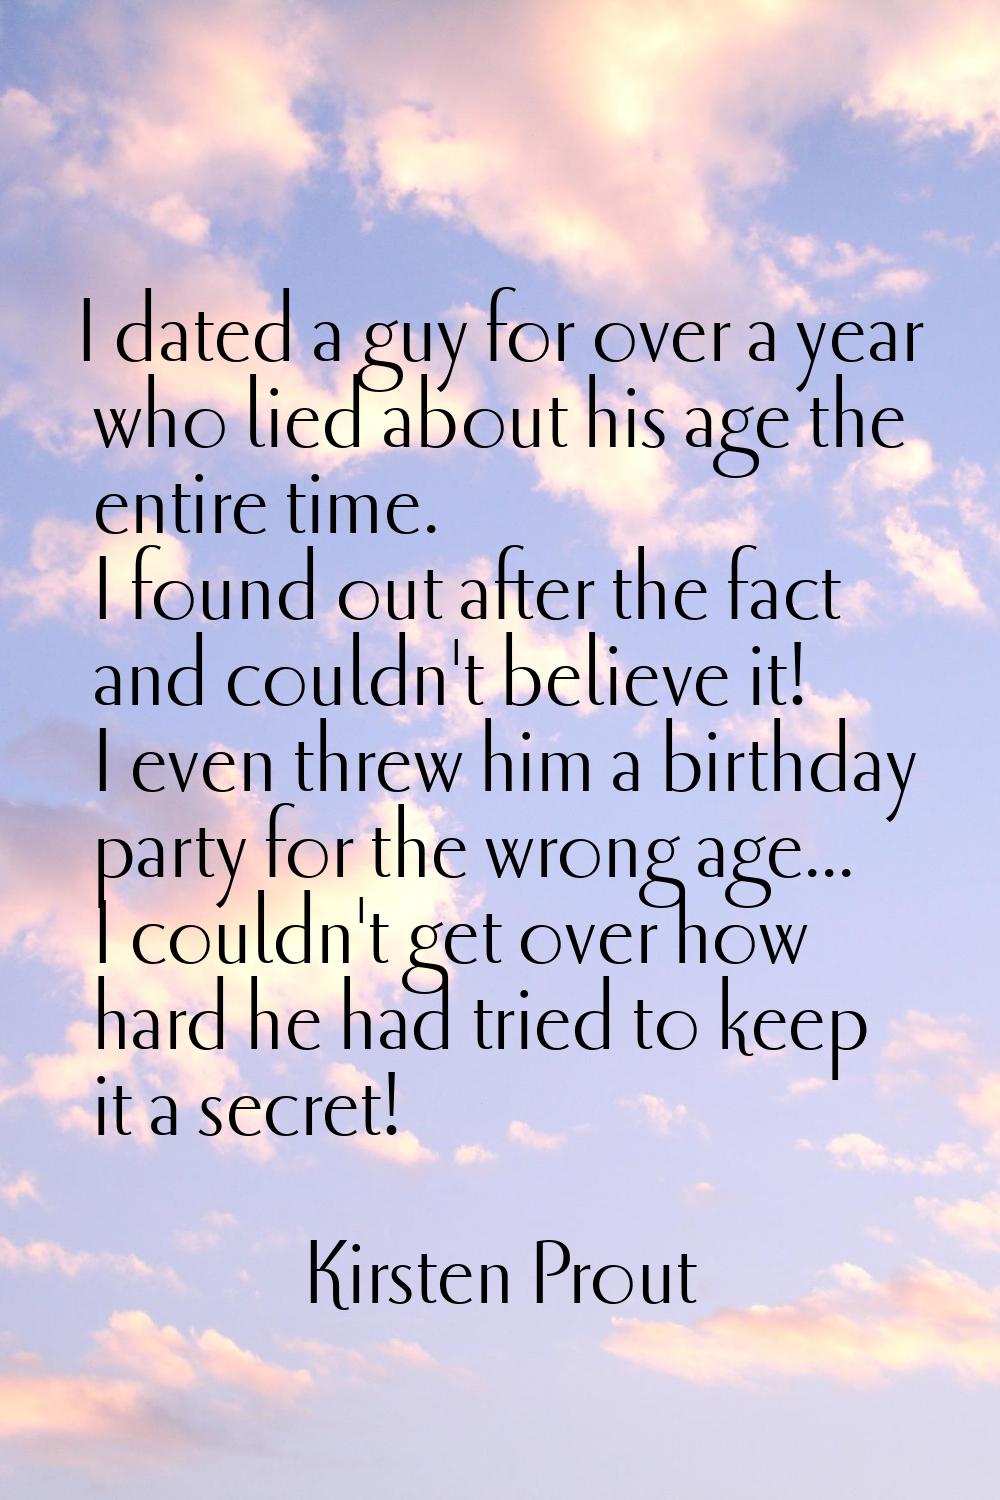 I dated a guy for over a year who lied about his age the entire time. I found out after the fact an